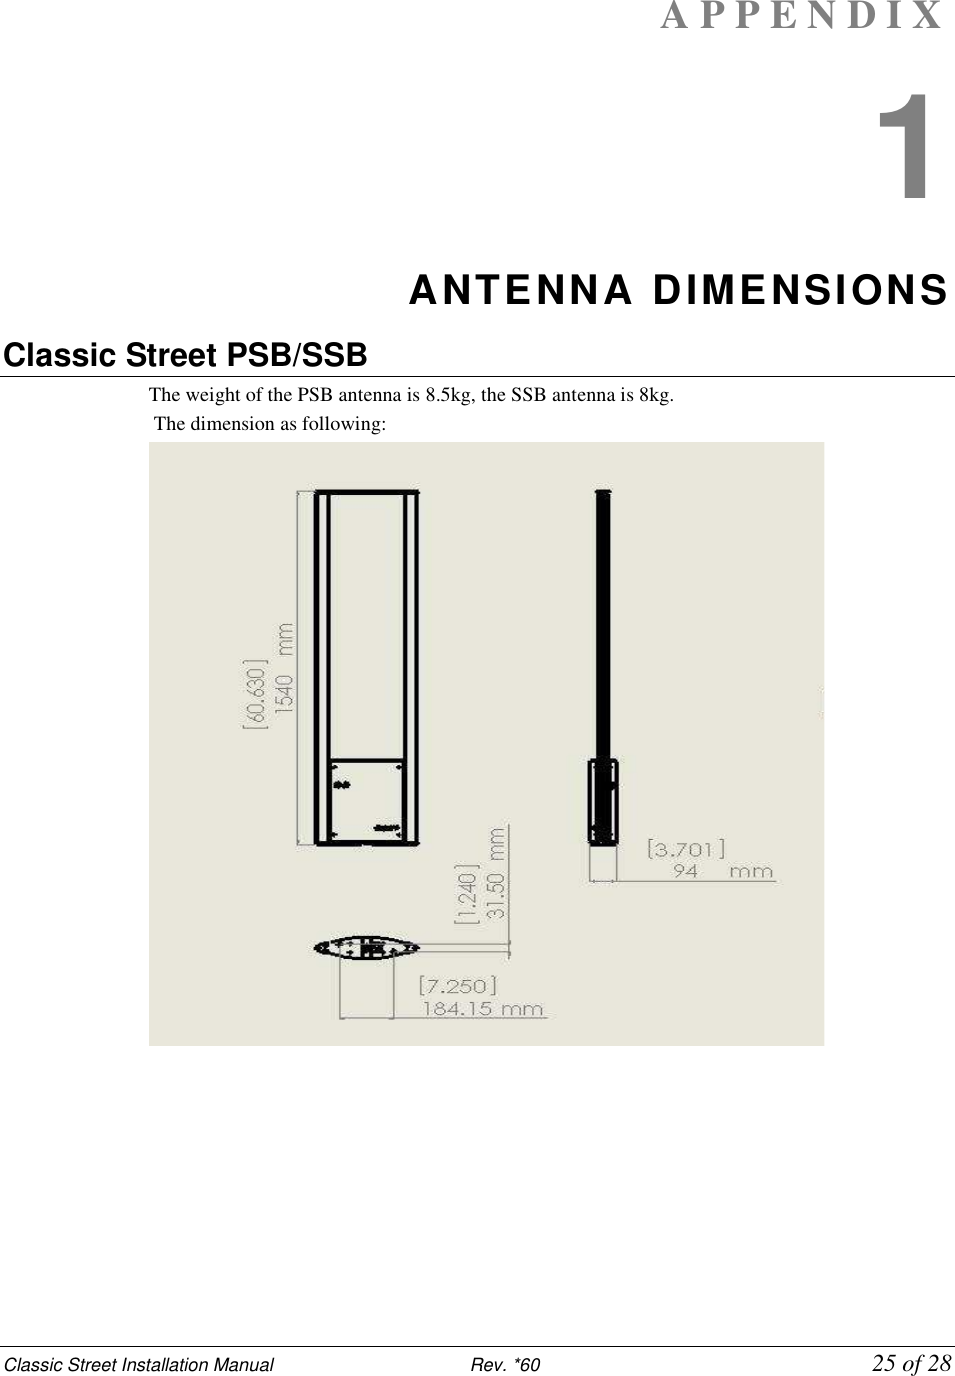 Classic Street Installation Manual                           Rev. *60           25 of 28 A P P E N D I X  1 ANTENNA DIMENSIONS Classic Street PSB/SSB The weight of the PSB antenna is 8.5kg, the SSB antenna is 8kg.  The dimension as following:  